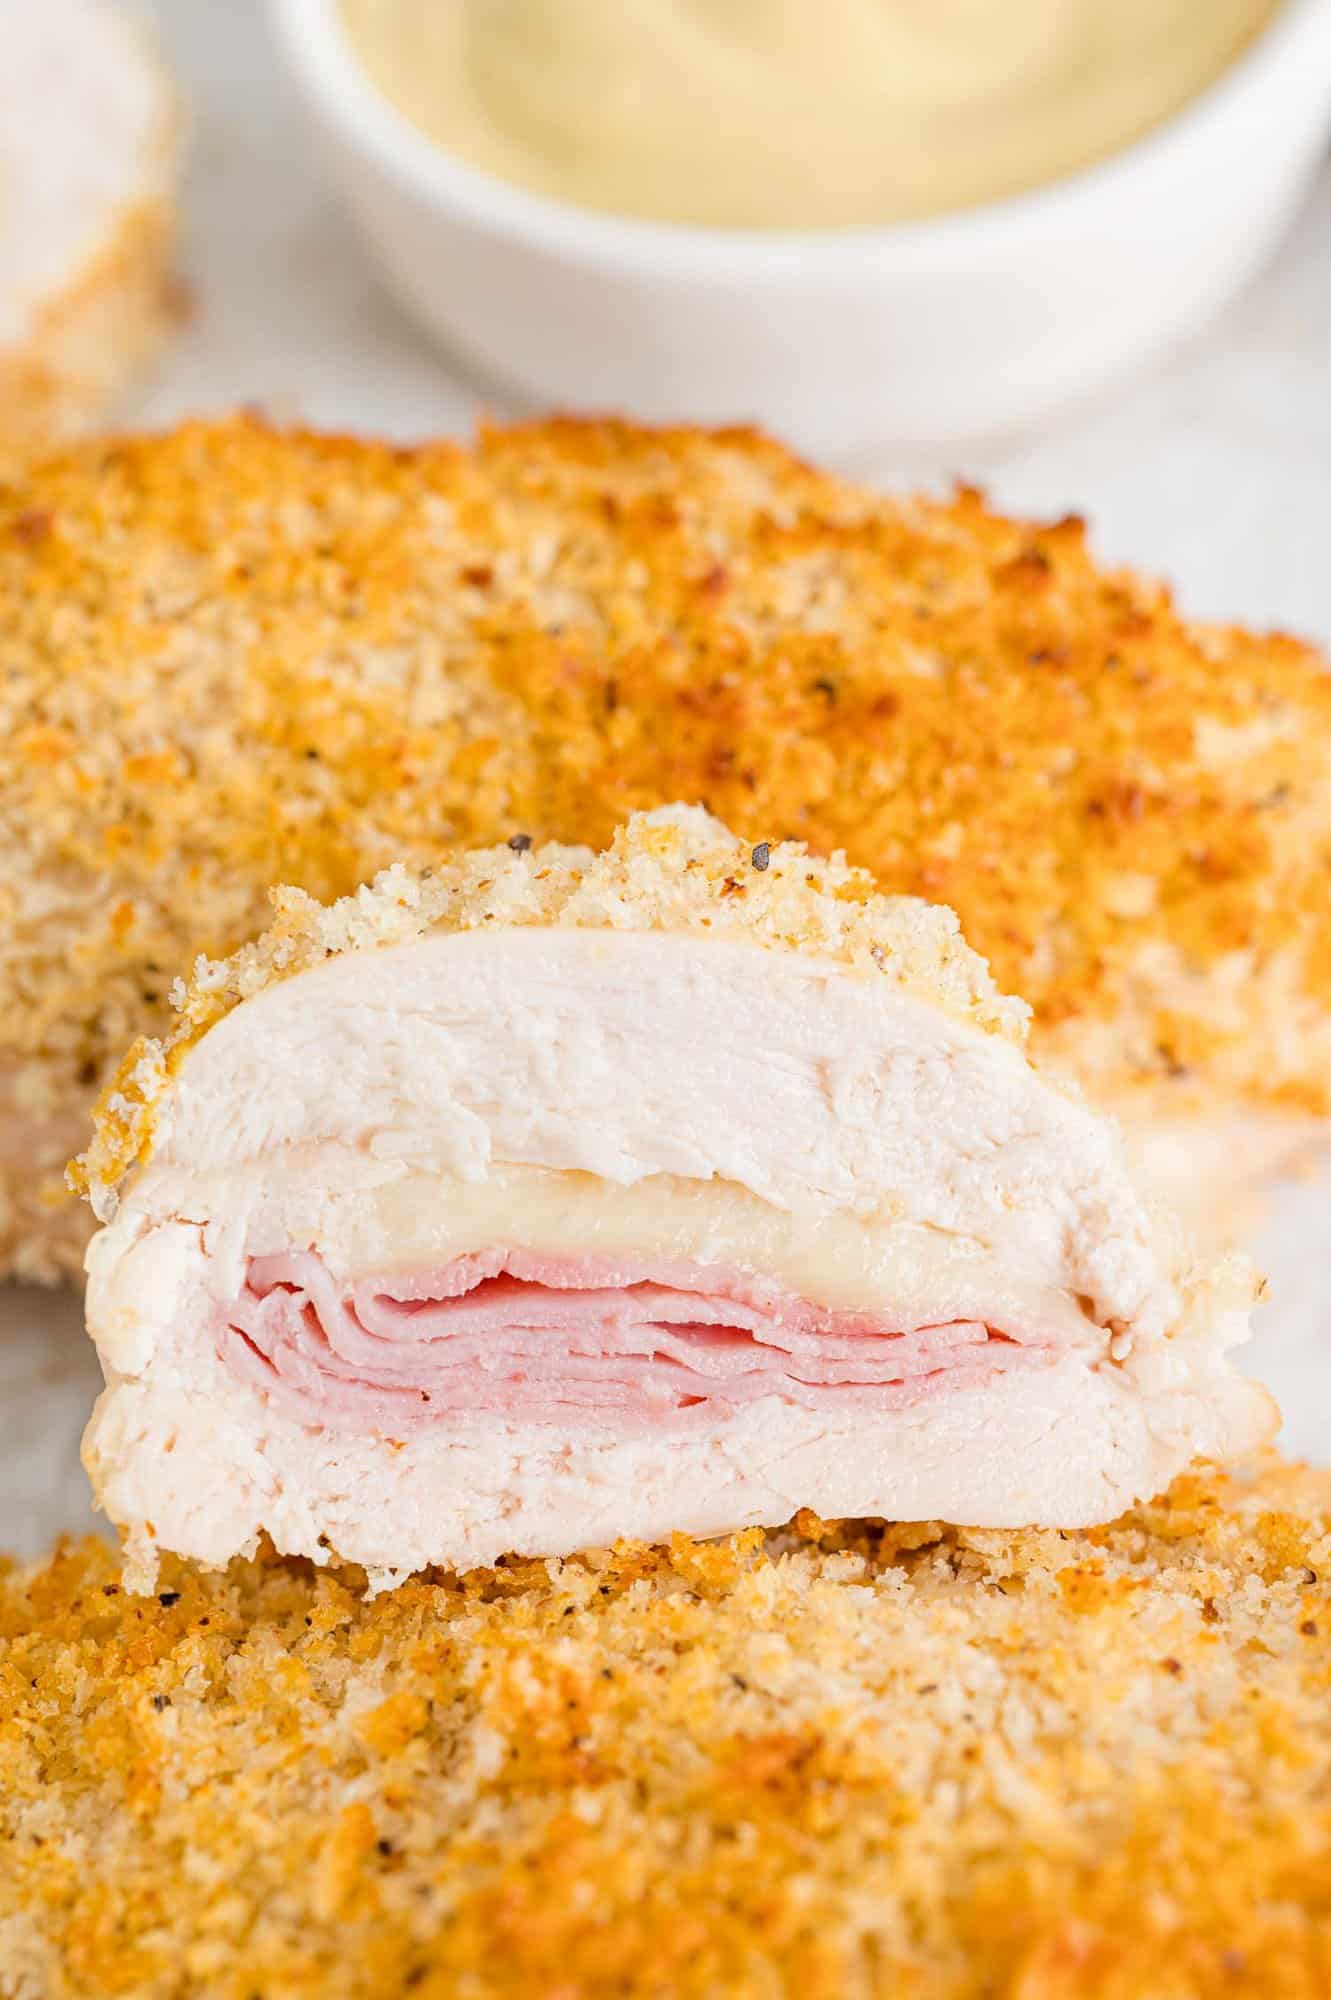 Baked chicken cordon bleu, cut in half to show filling.